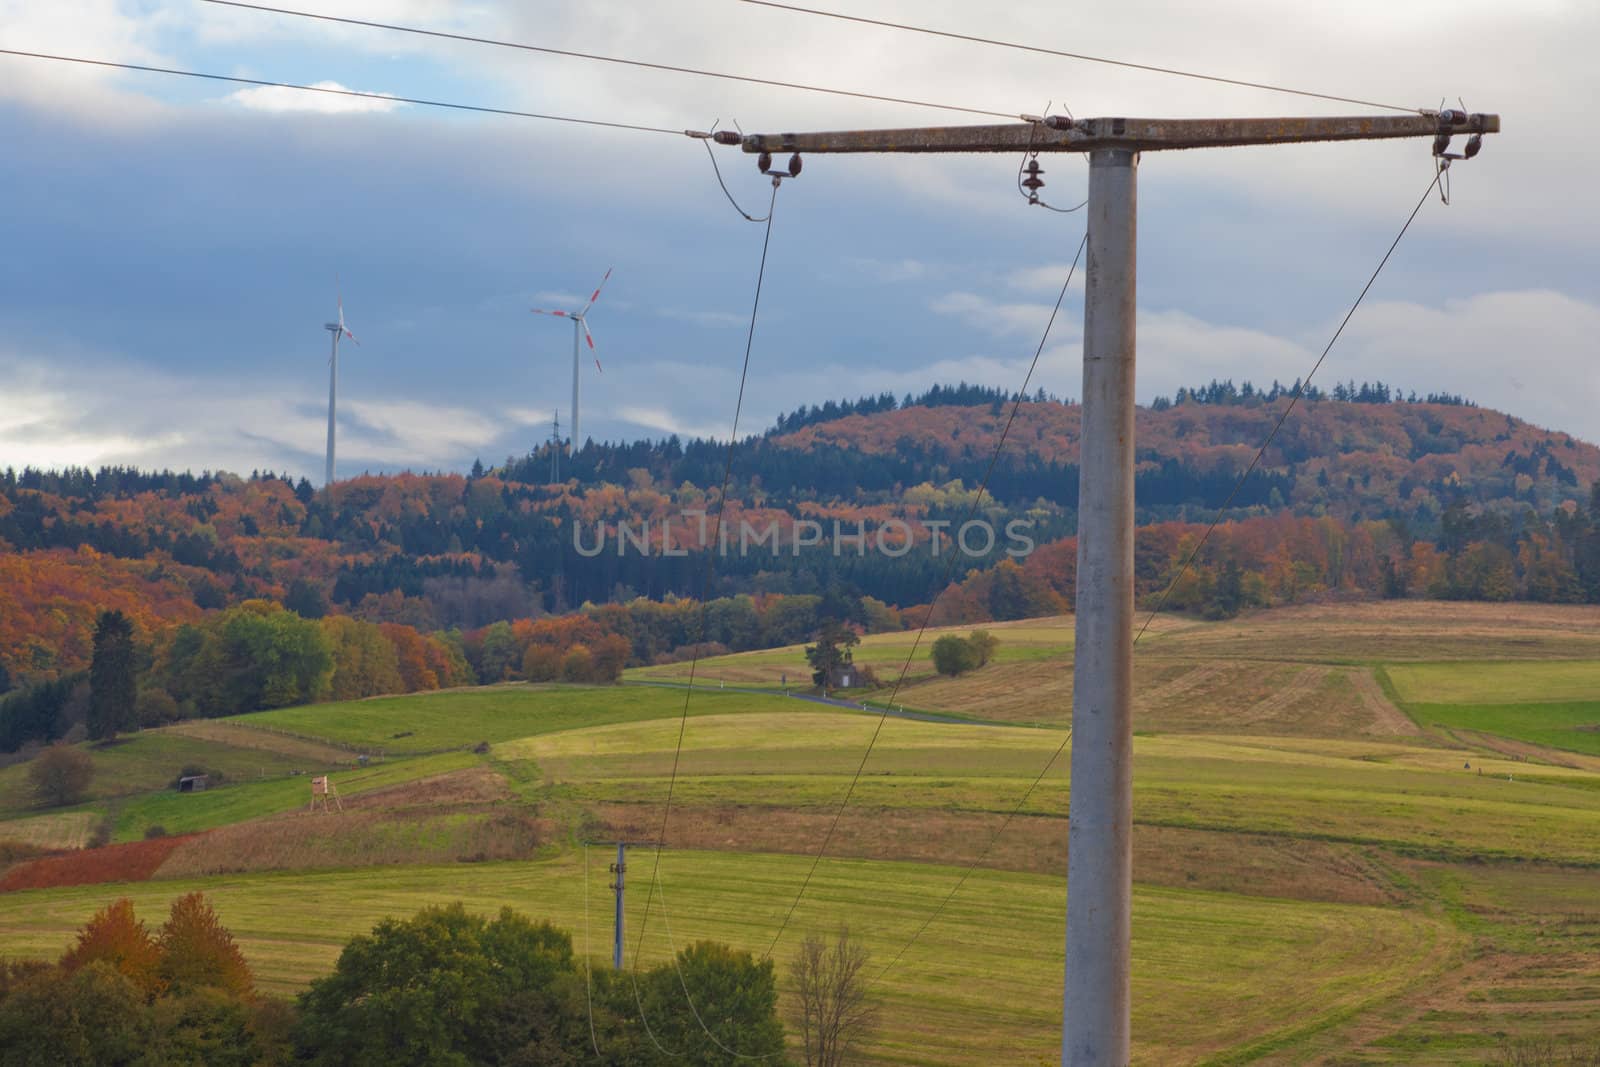 Large wind turbines on the horizon of Eifel, rural Germany, Europe, with high-voltage transmission line in foreground.